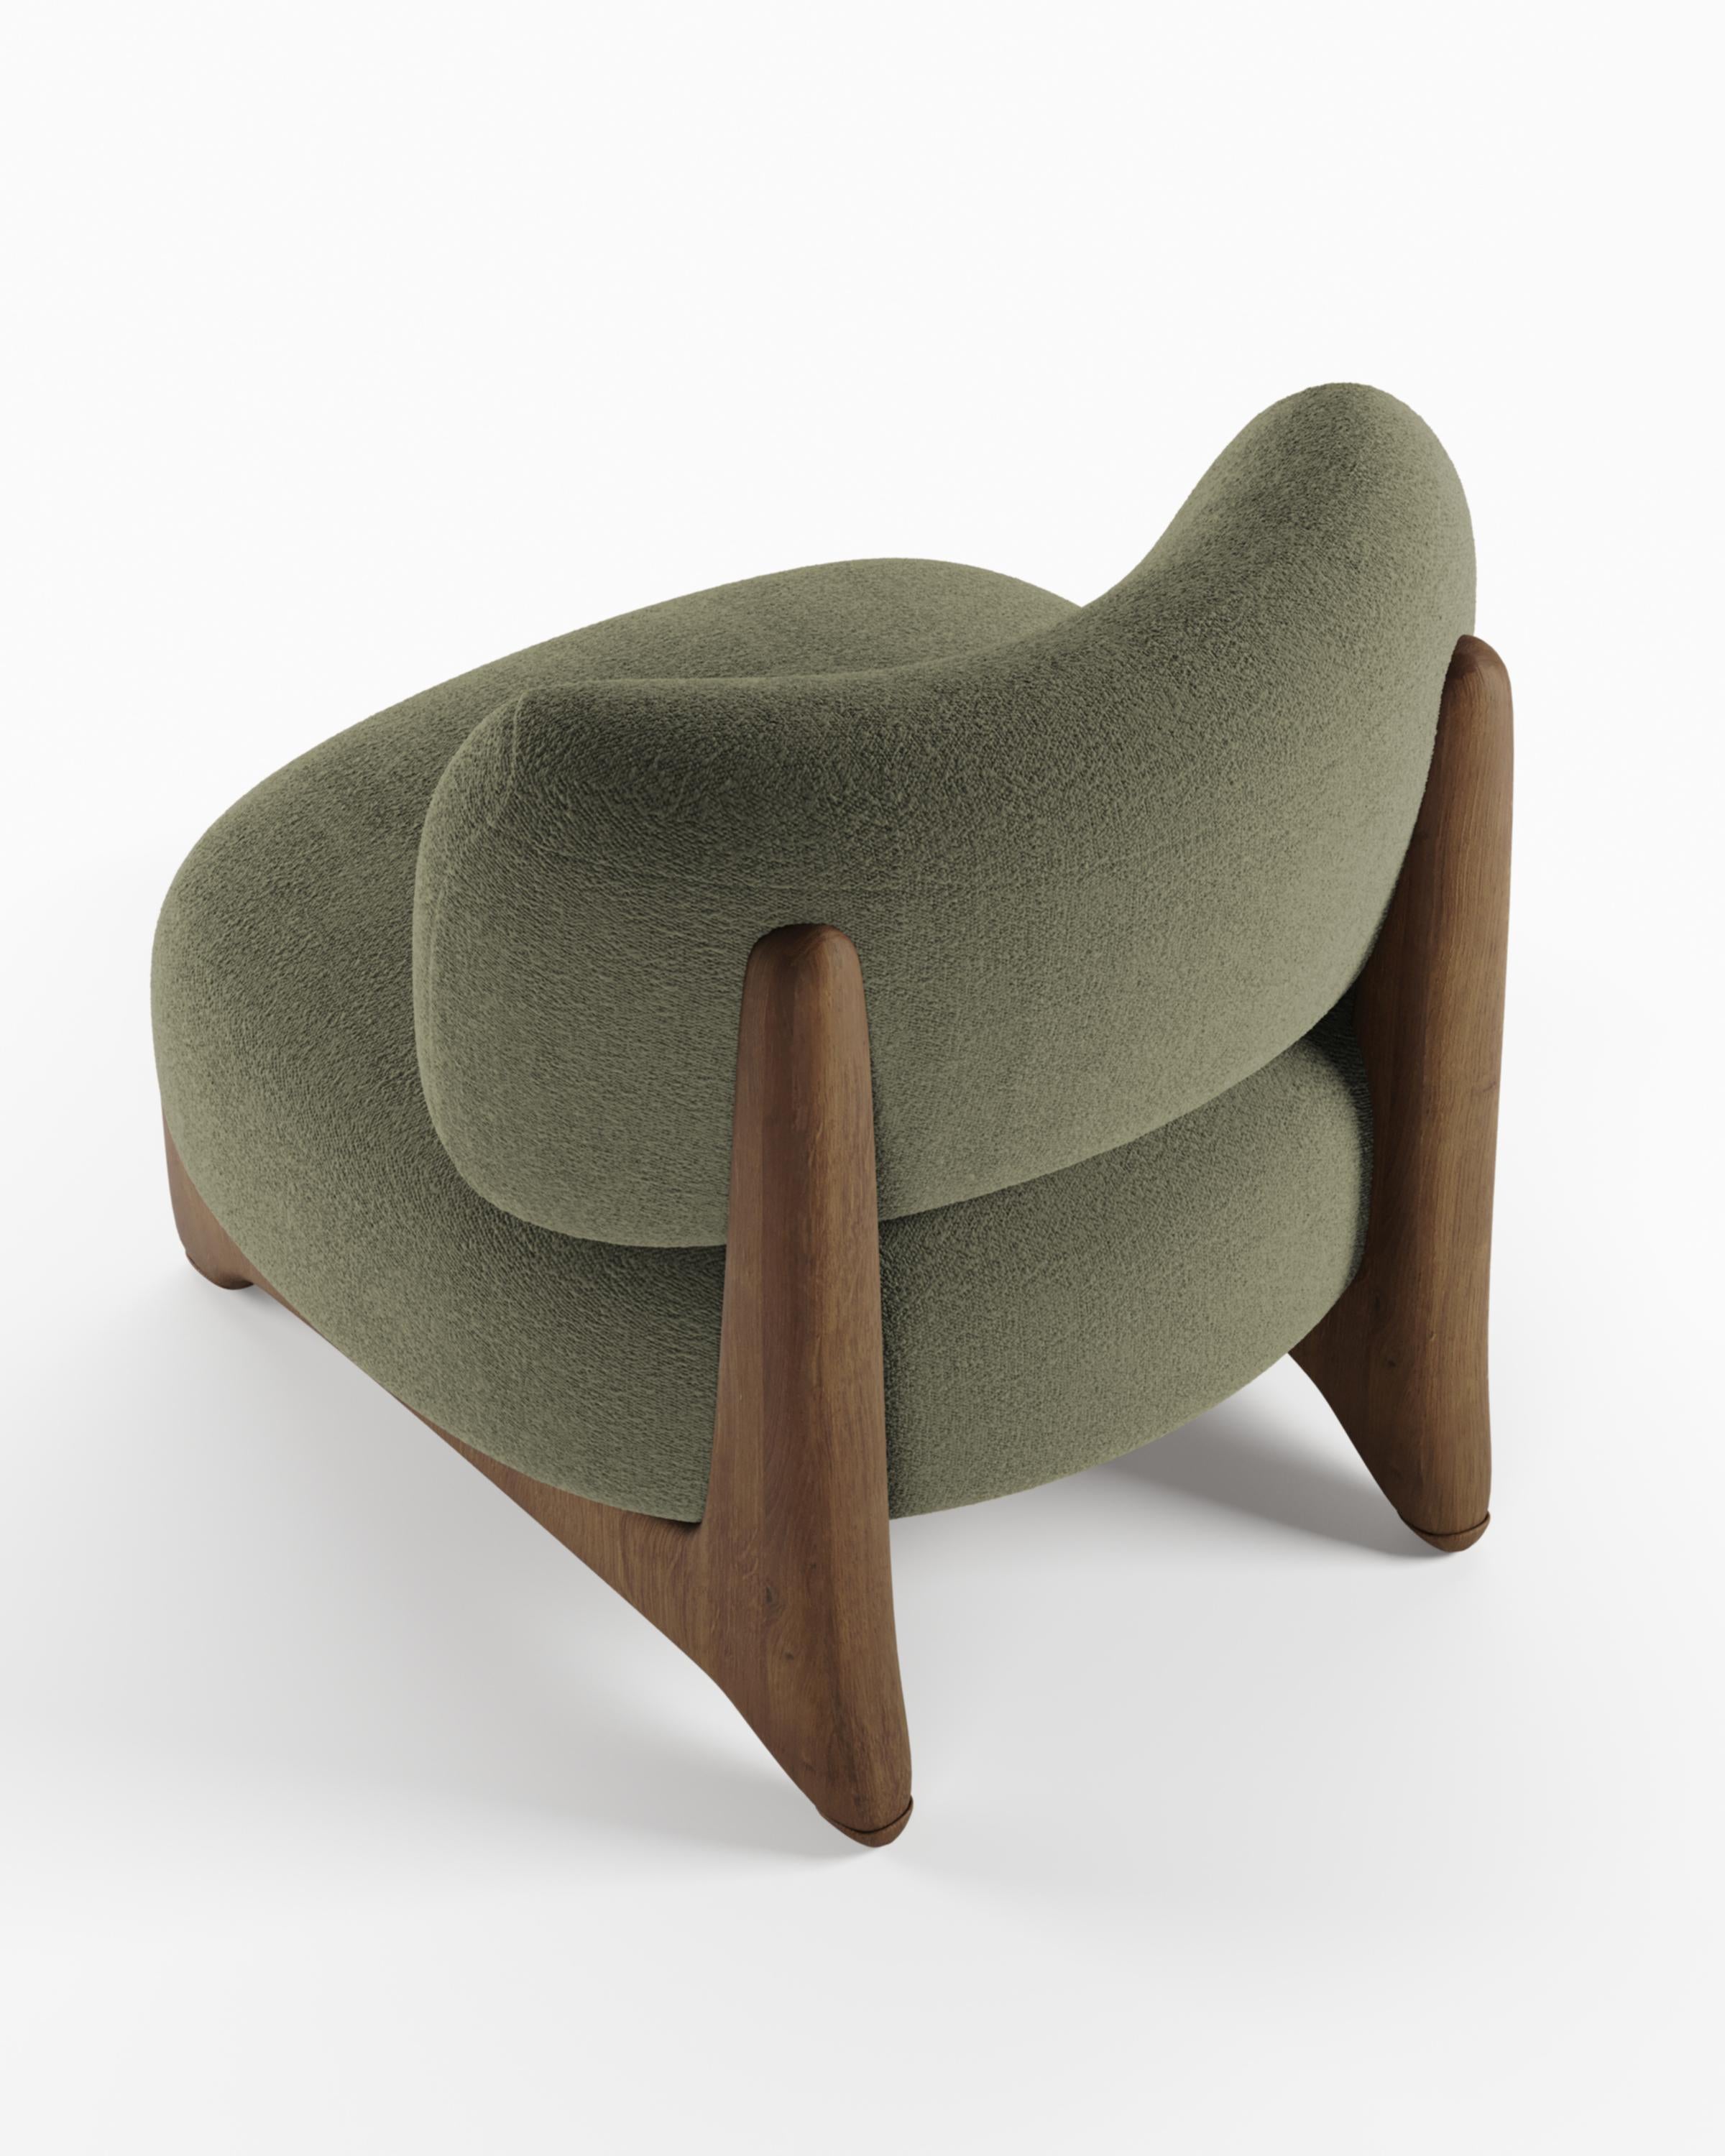 Contemporary Modern Tobo armchair in fabric & oak wood by Alter Ego for Collector Studio.

Underpinned by a Minimalist and sophisticated aesthetic of clean lines.

Dimensions:
W 70 cm 27,6”
D 70 cm 27,6”
H 73 cm 28”
SH 40 cm 15,7”

Product